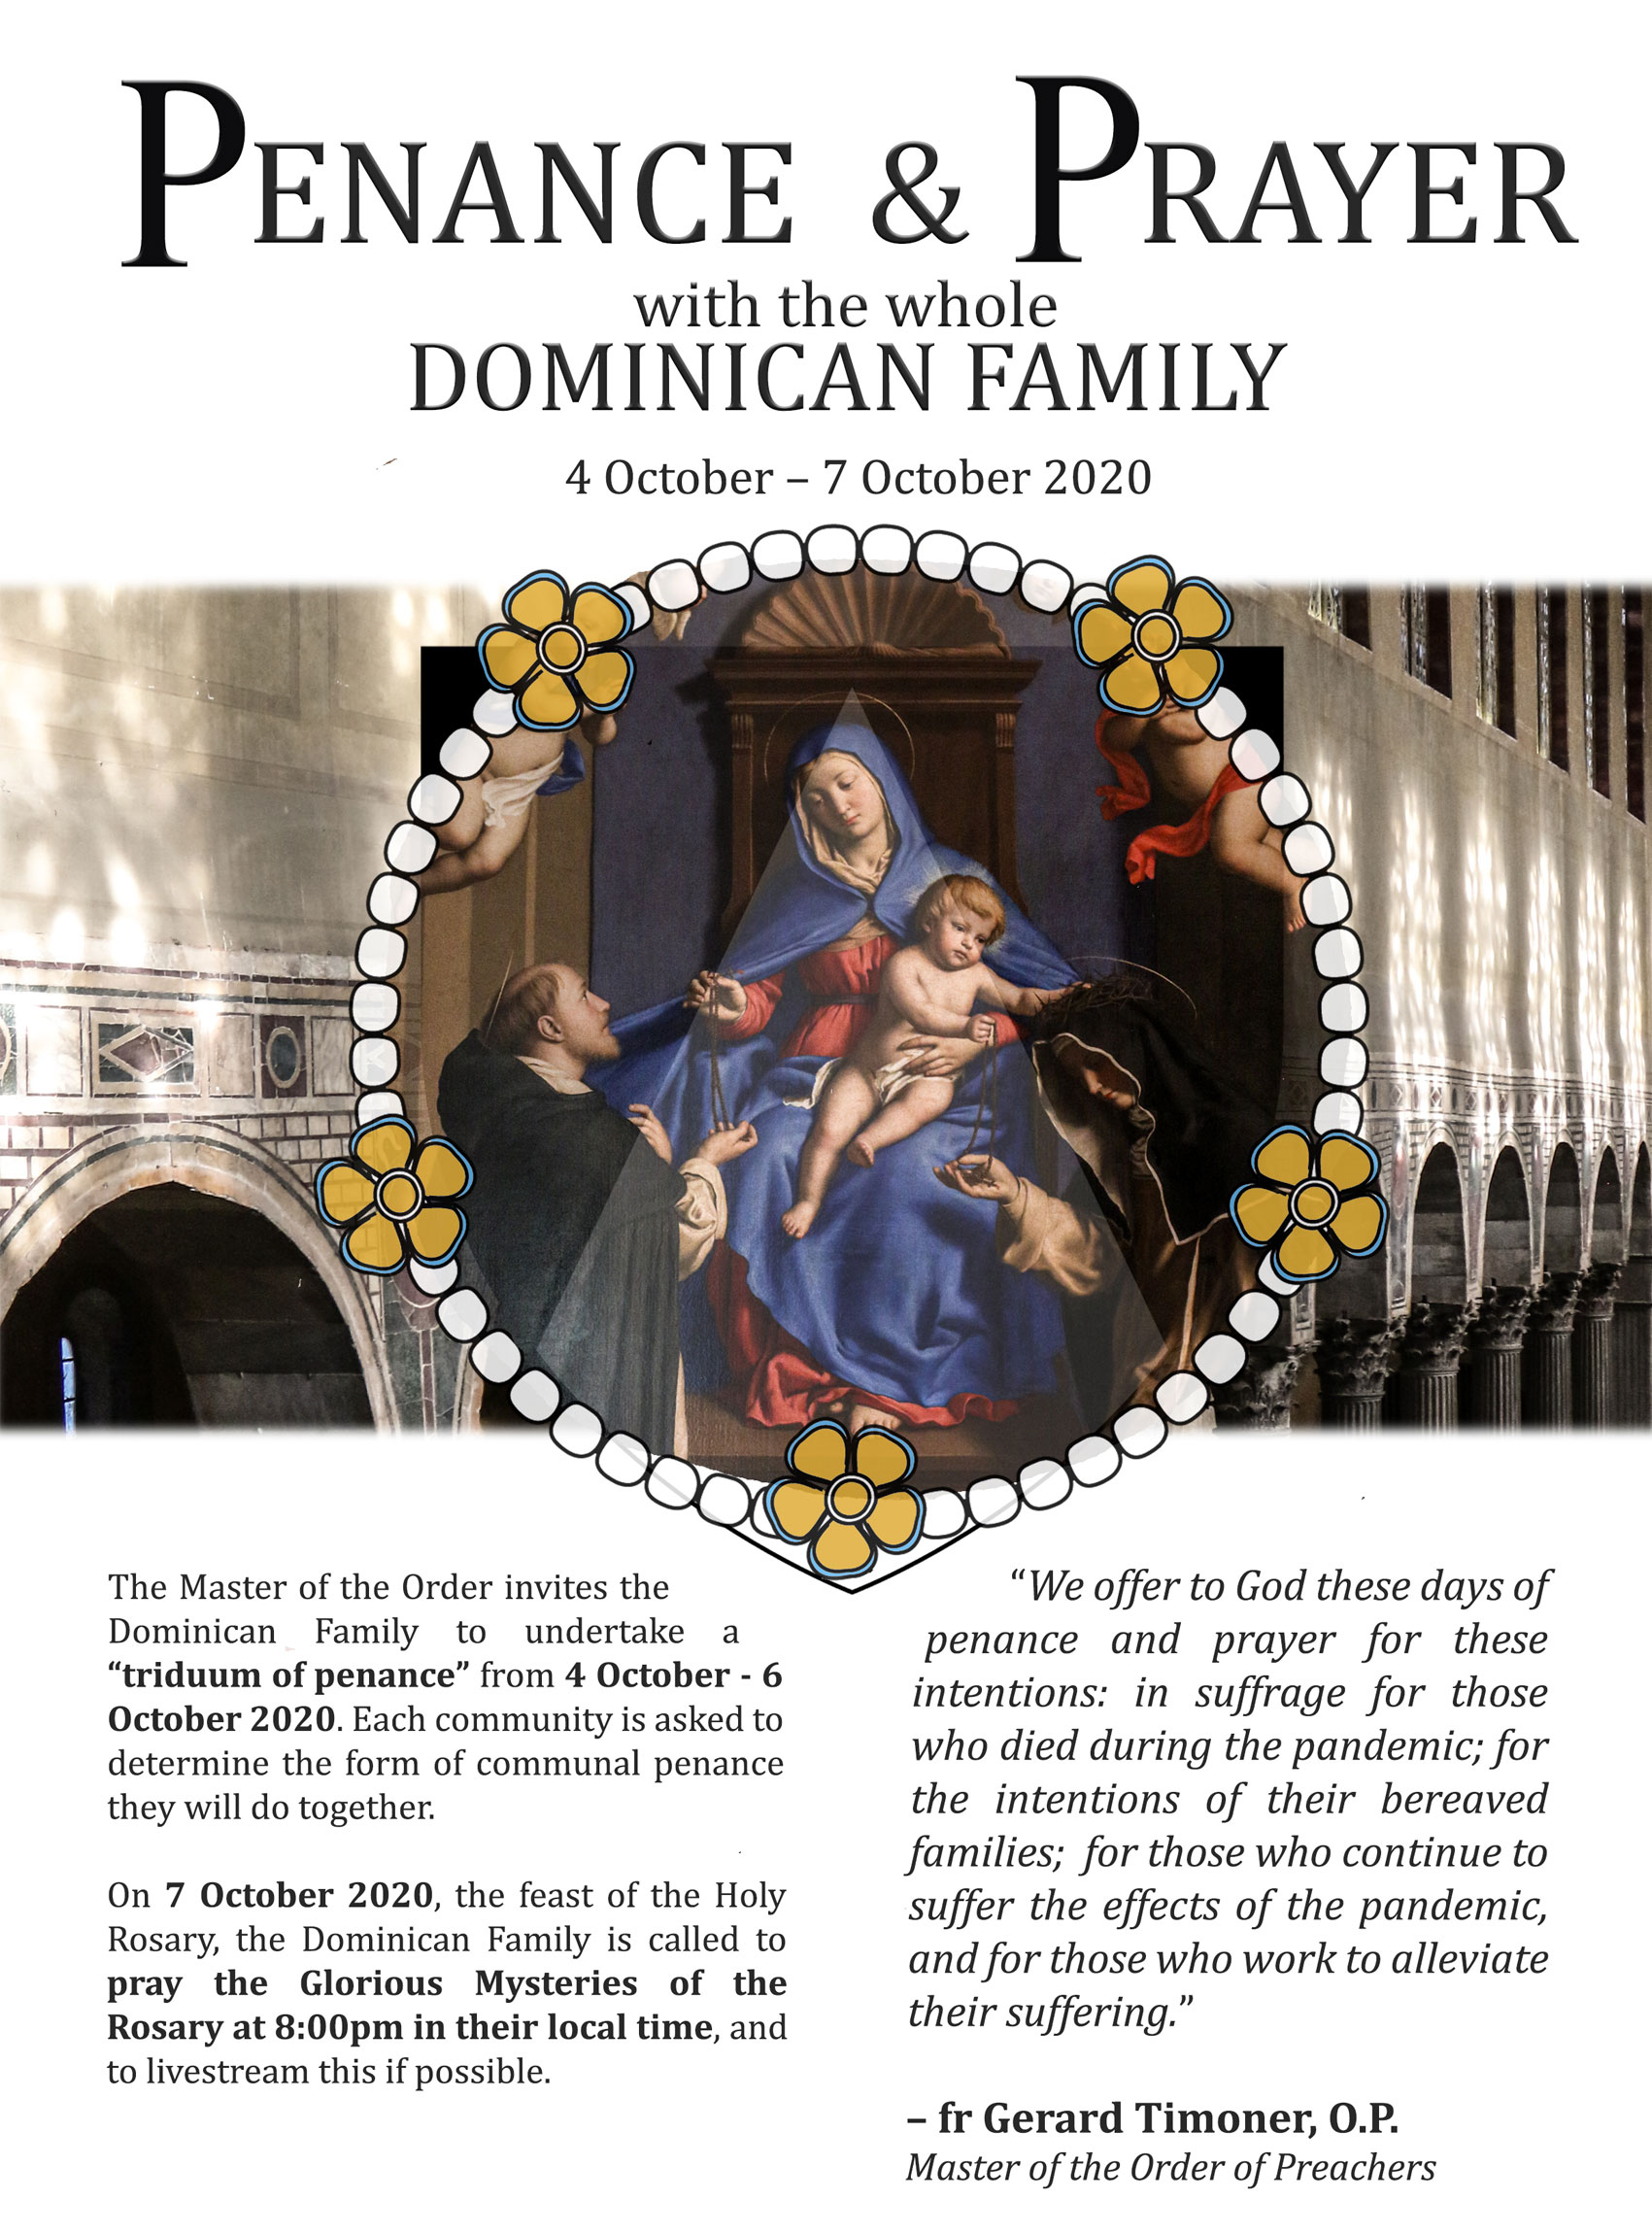 Poster of the Penance and Prayer with the Whole Dominican Family to be observed October 4 - 7, 2020. The information is summarized below.